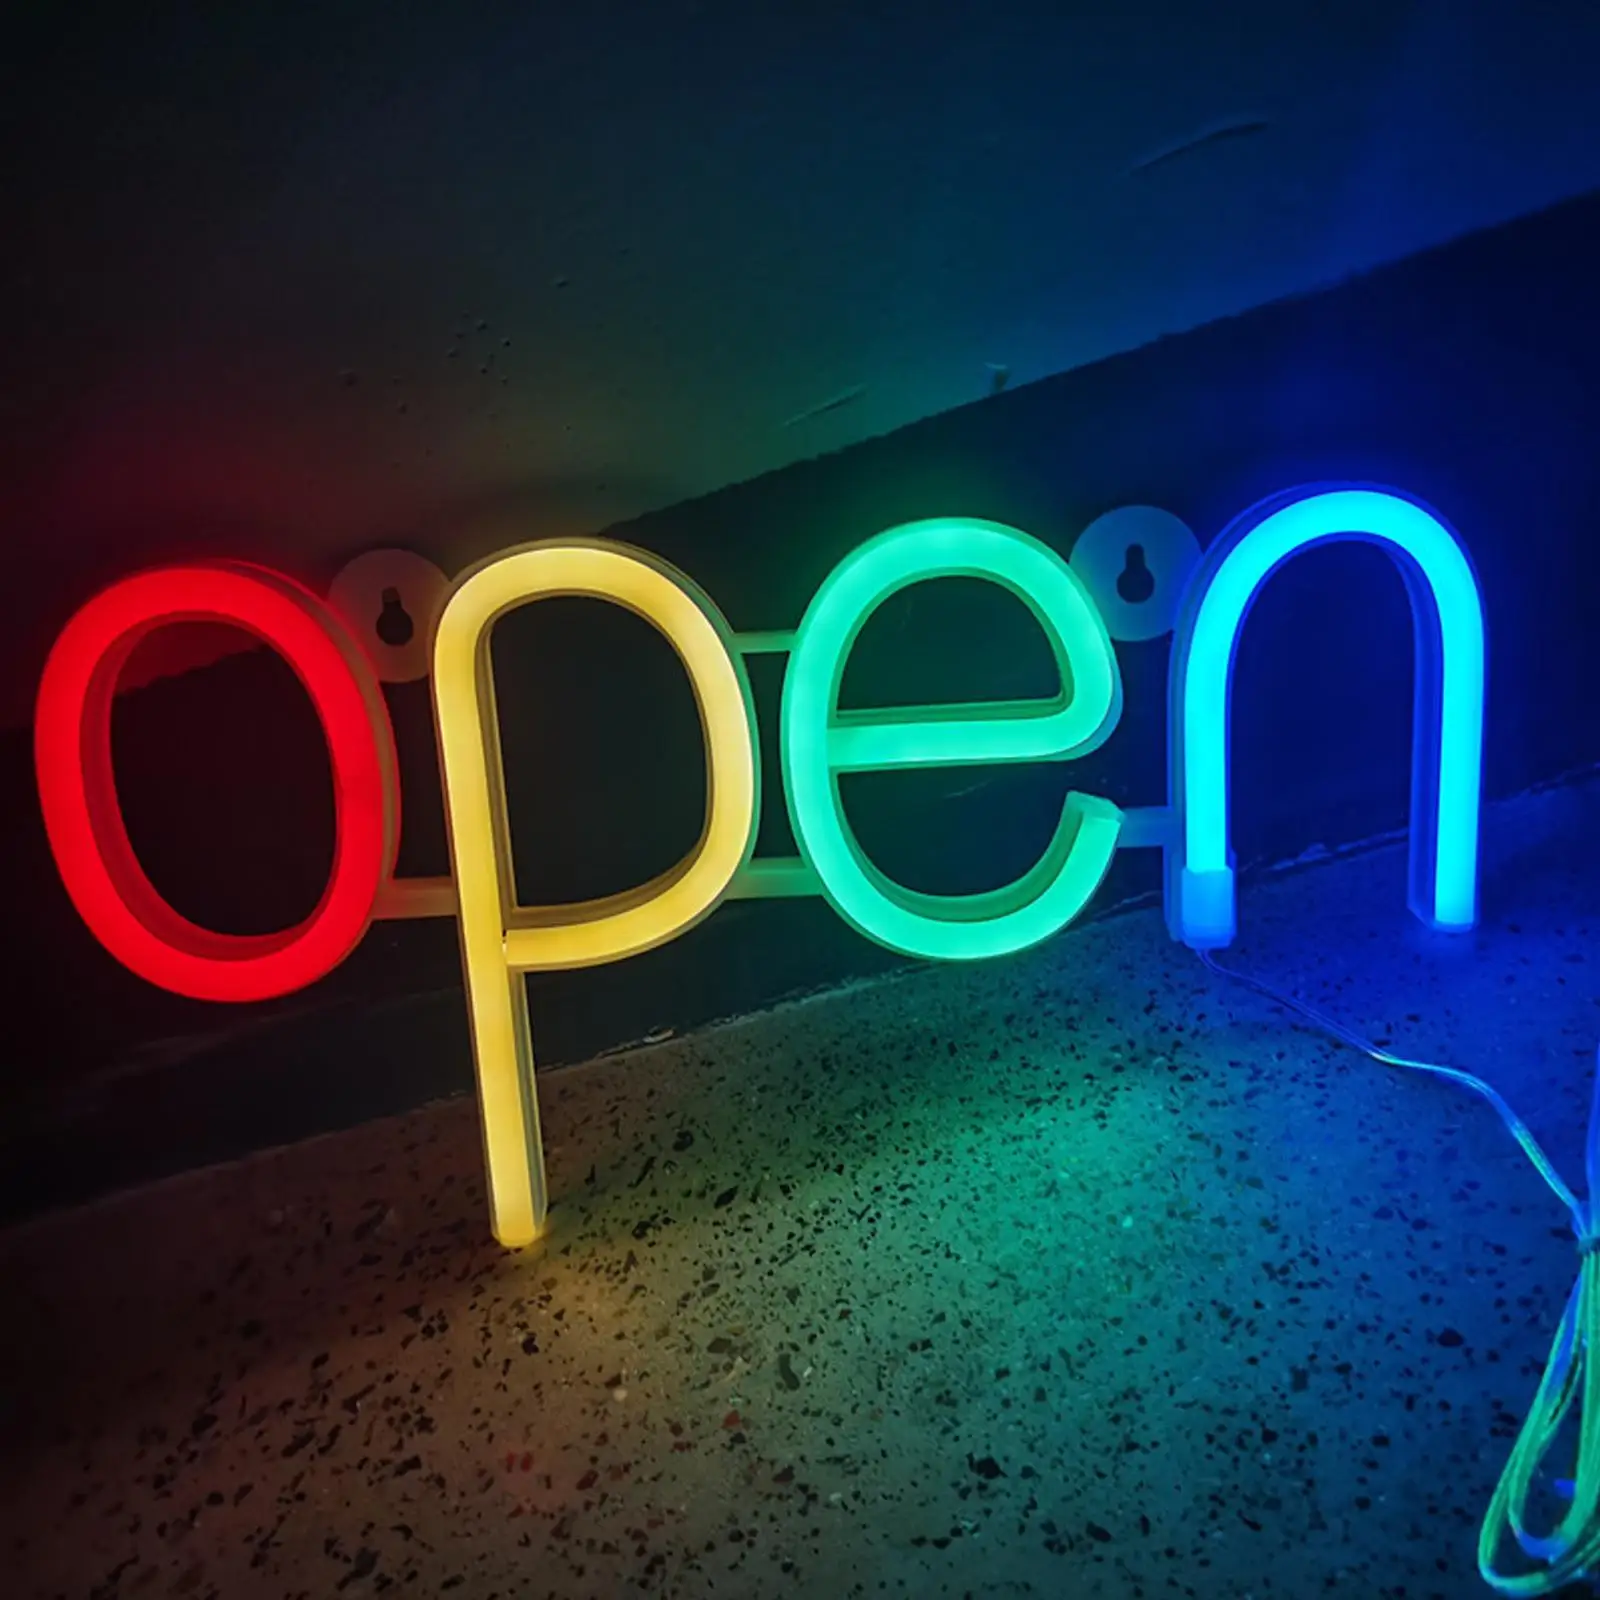 LED Open Sign Lighting Light Neon Lights Store Window Cafe Outdoor Lamp Club